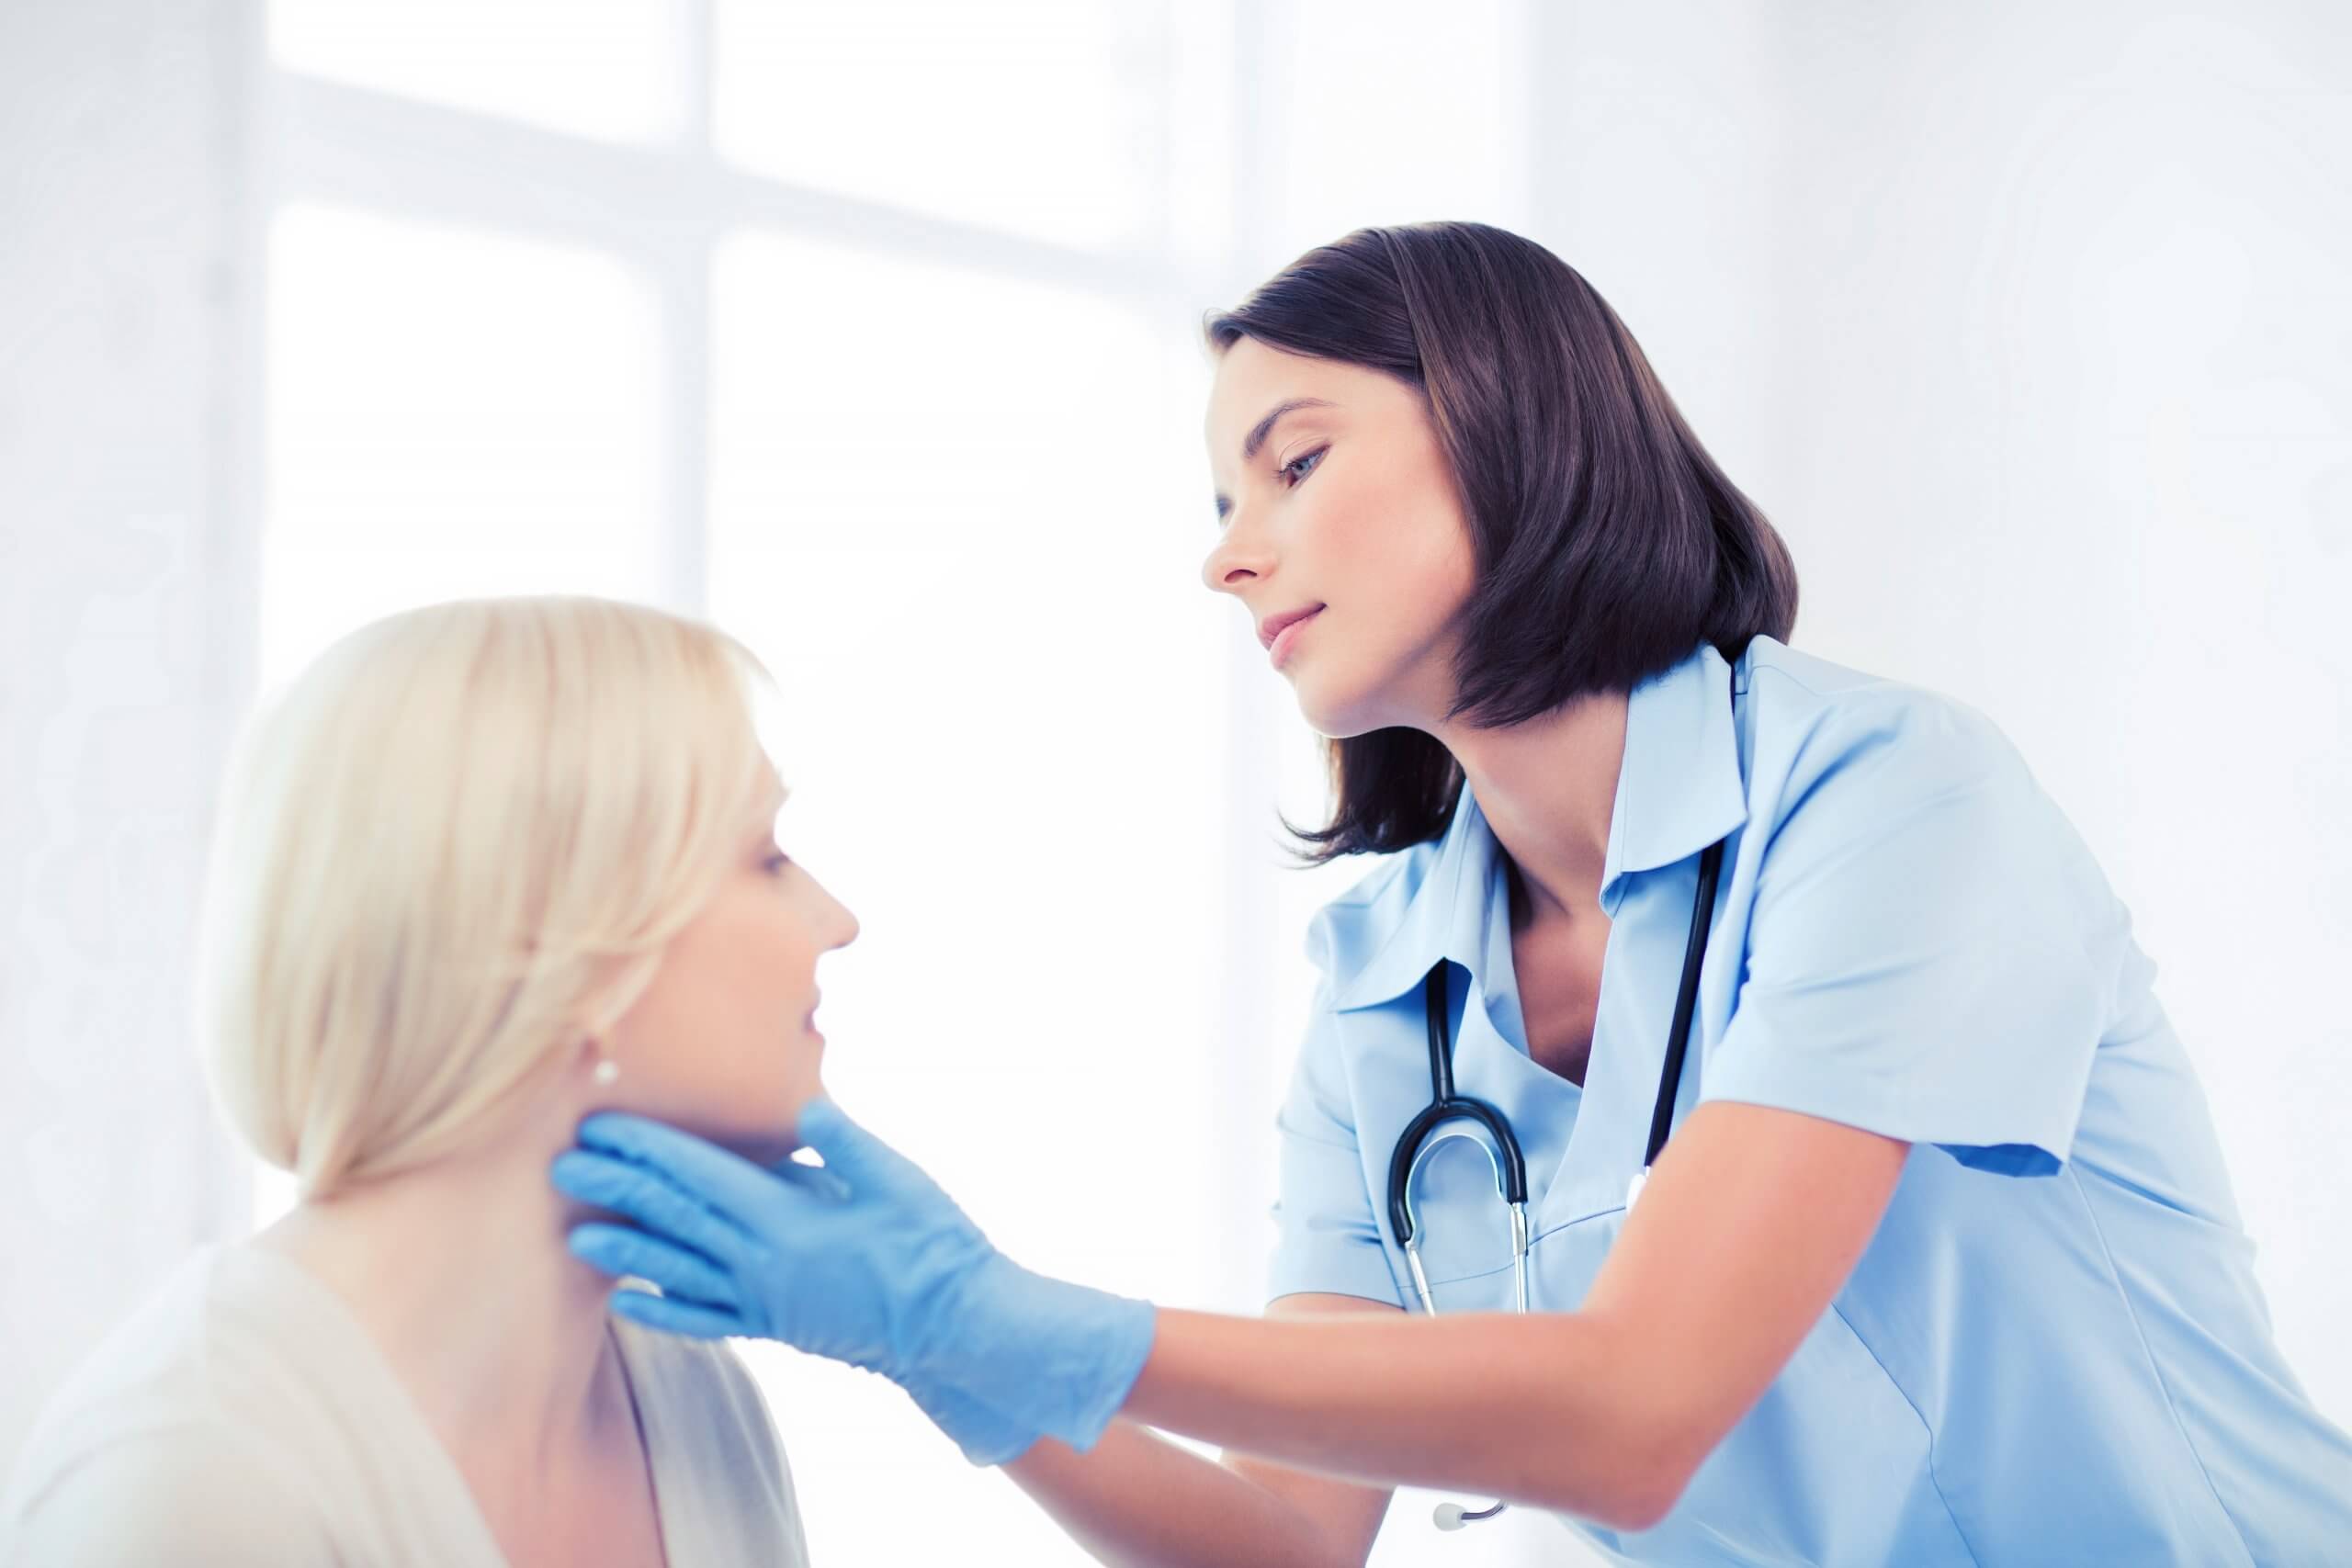 aesthetic nurse practitioner examining a woman's face